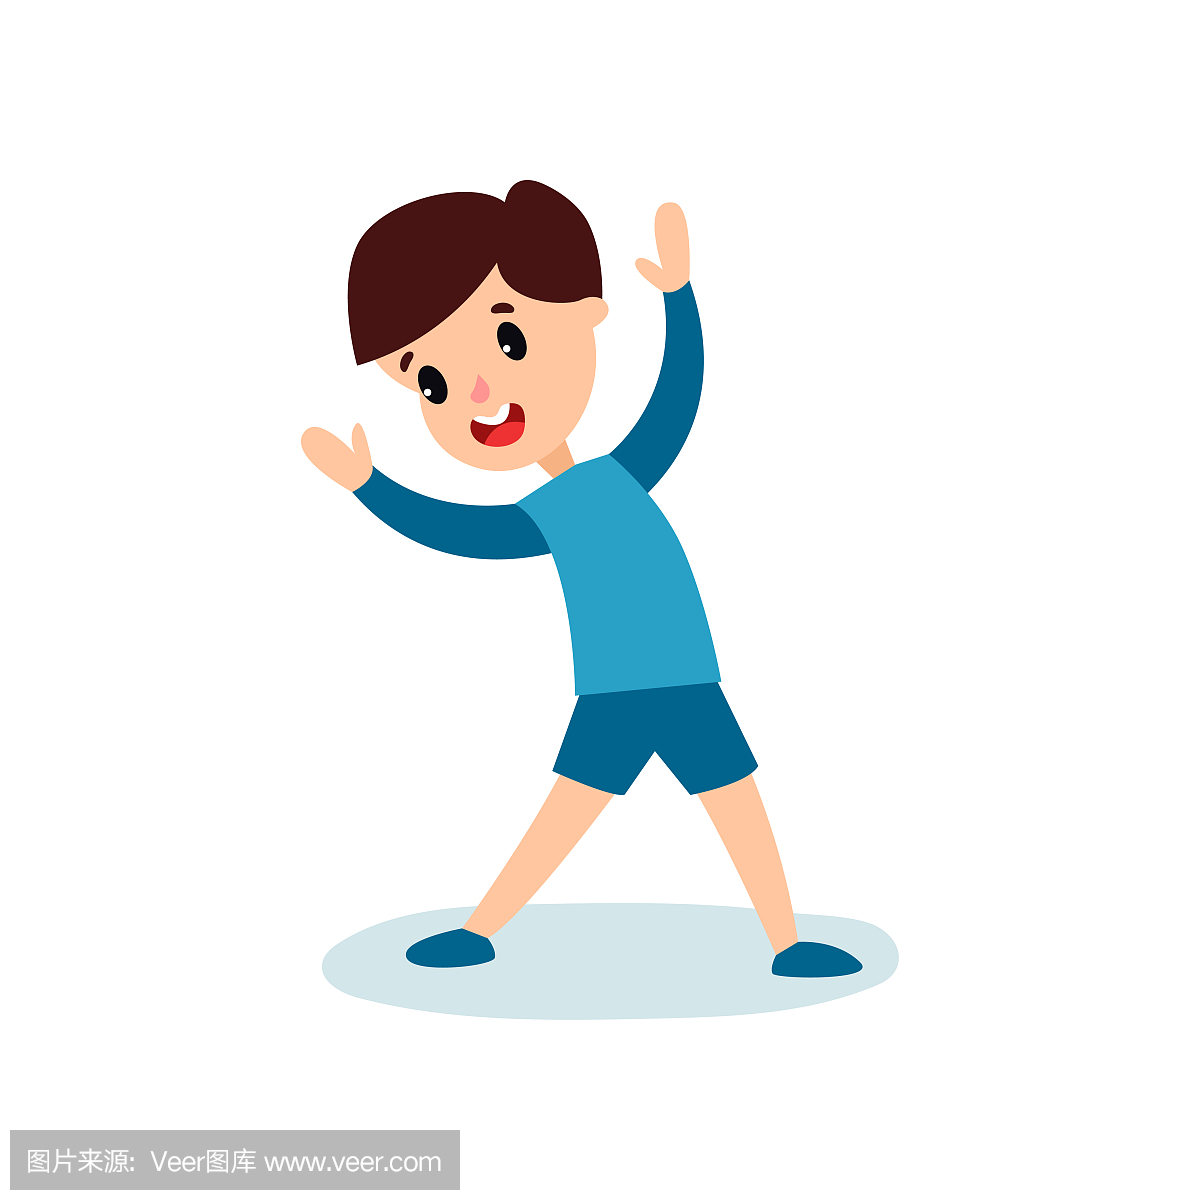 miling little boy character doing sport exercise, 